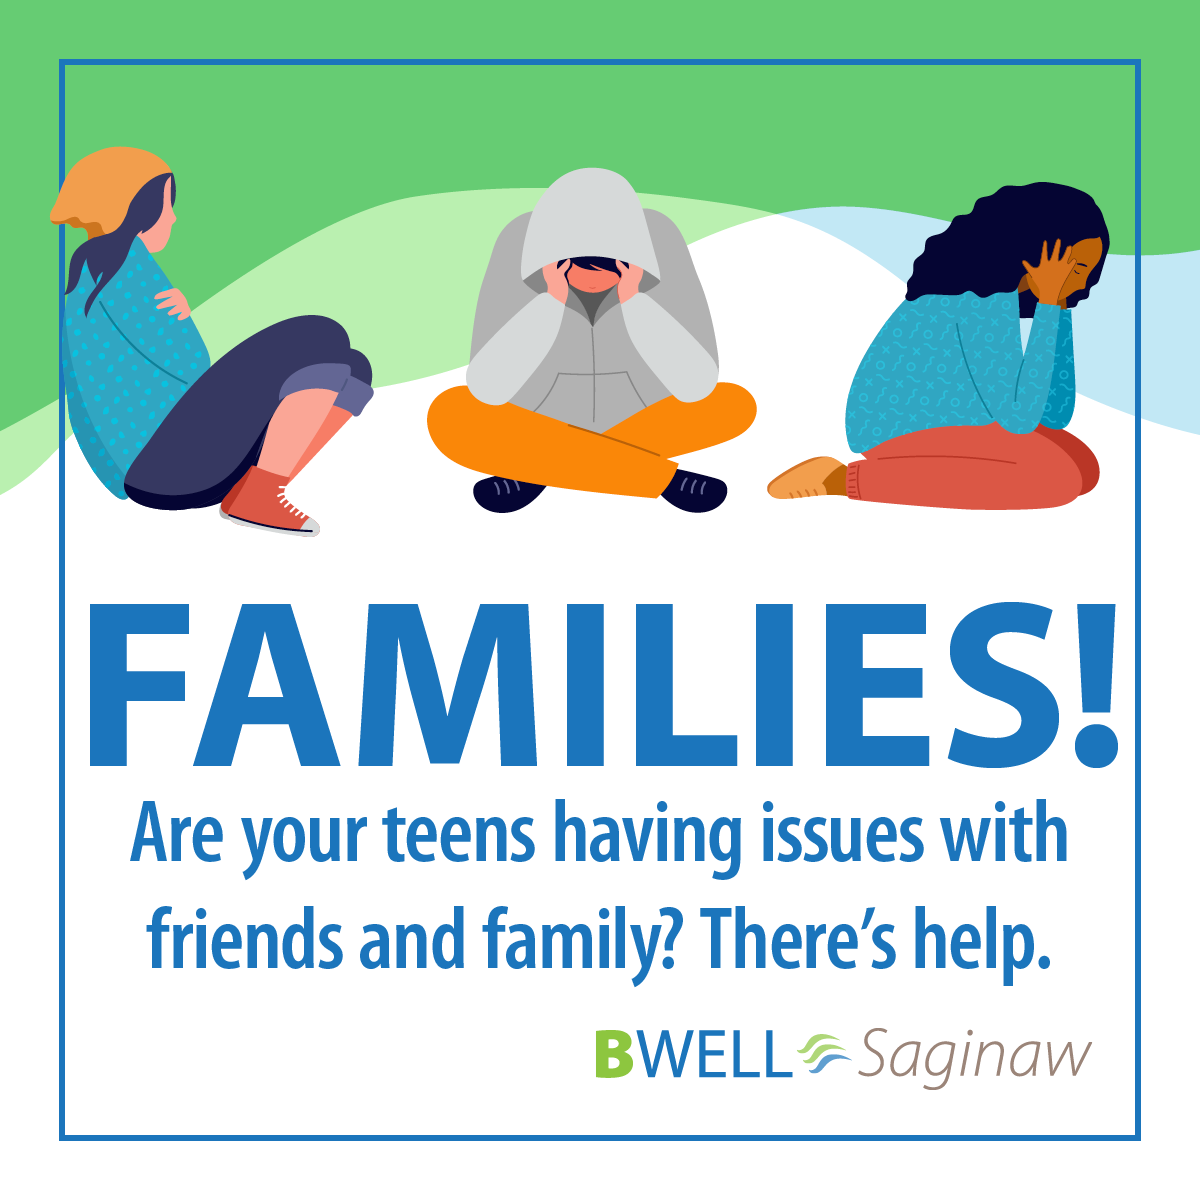 #2: Families: Are your teens having issues with friends and family? There’s help.